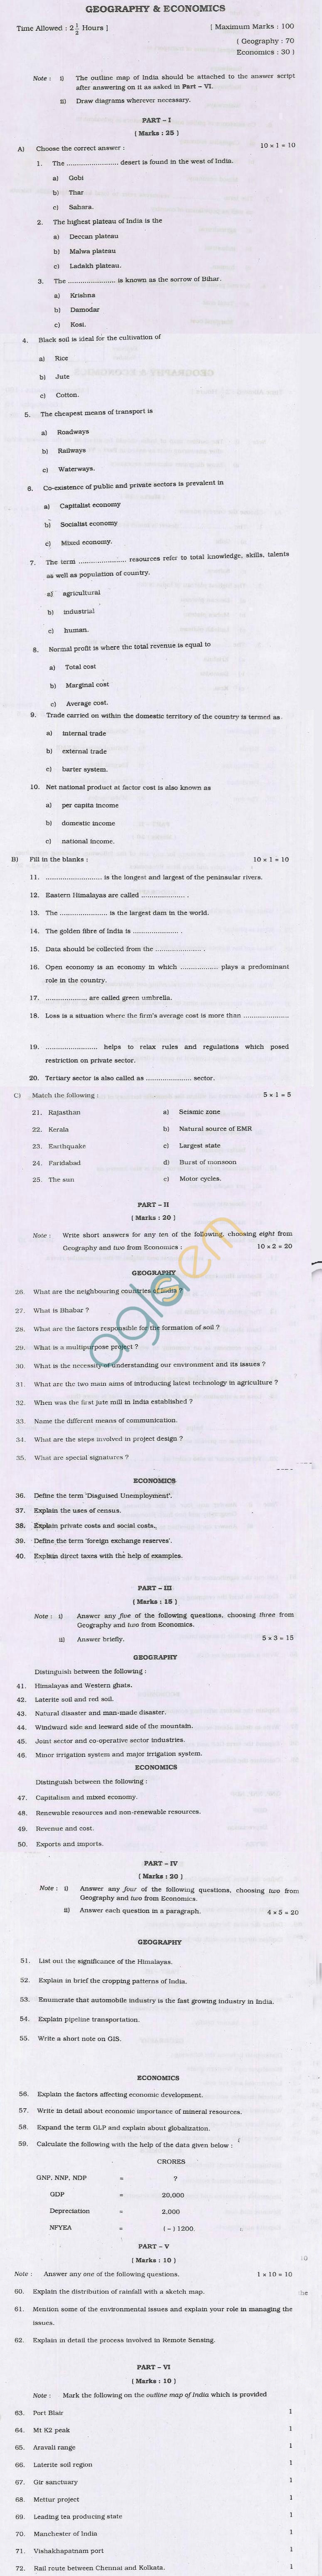 TN Board Matriculation Geography & Economics Question Papers June 2011